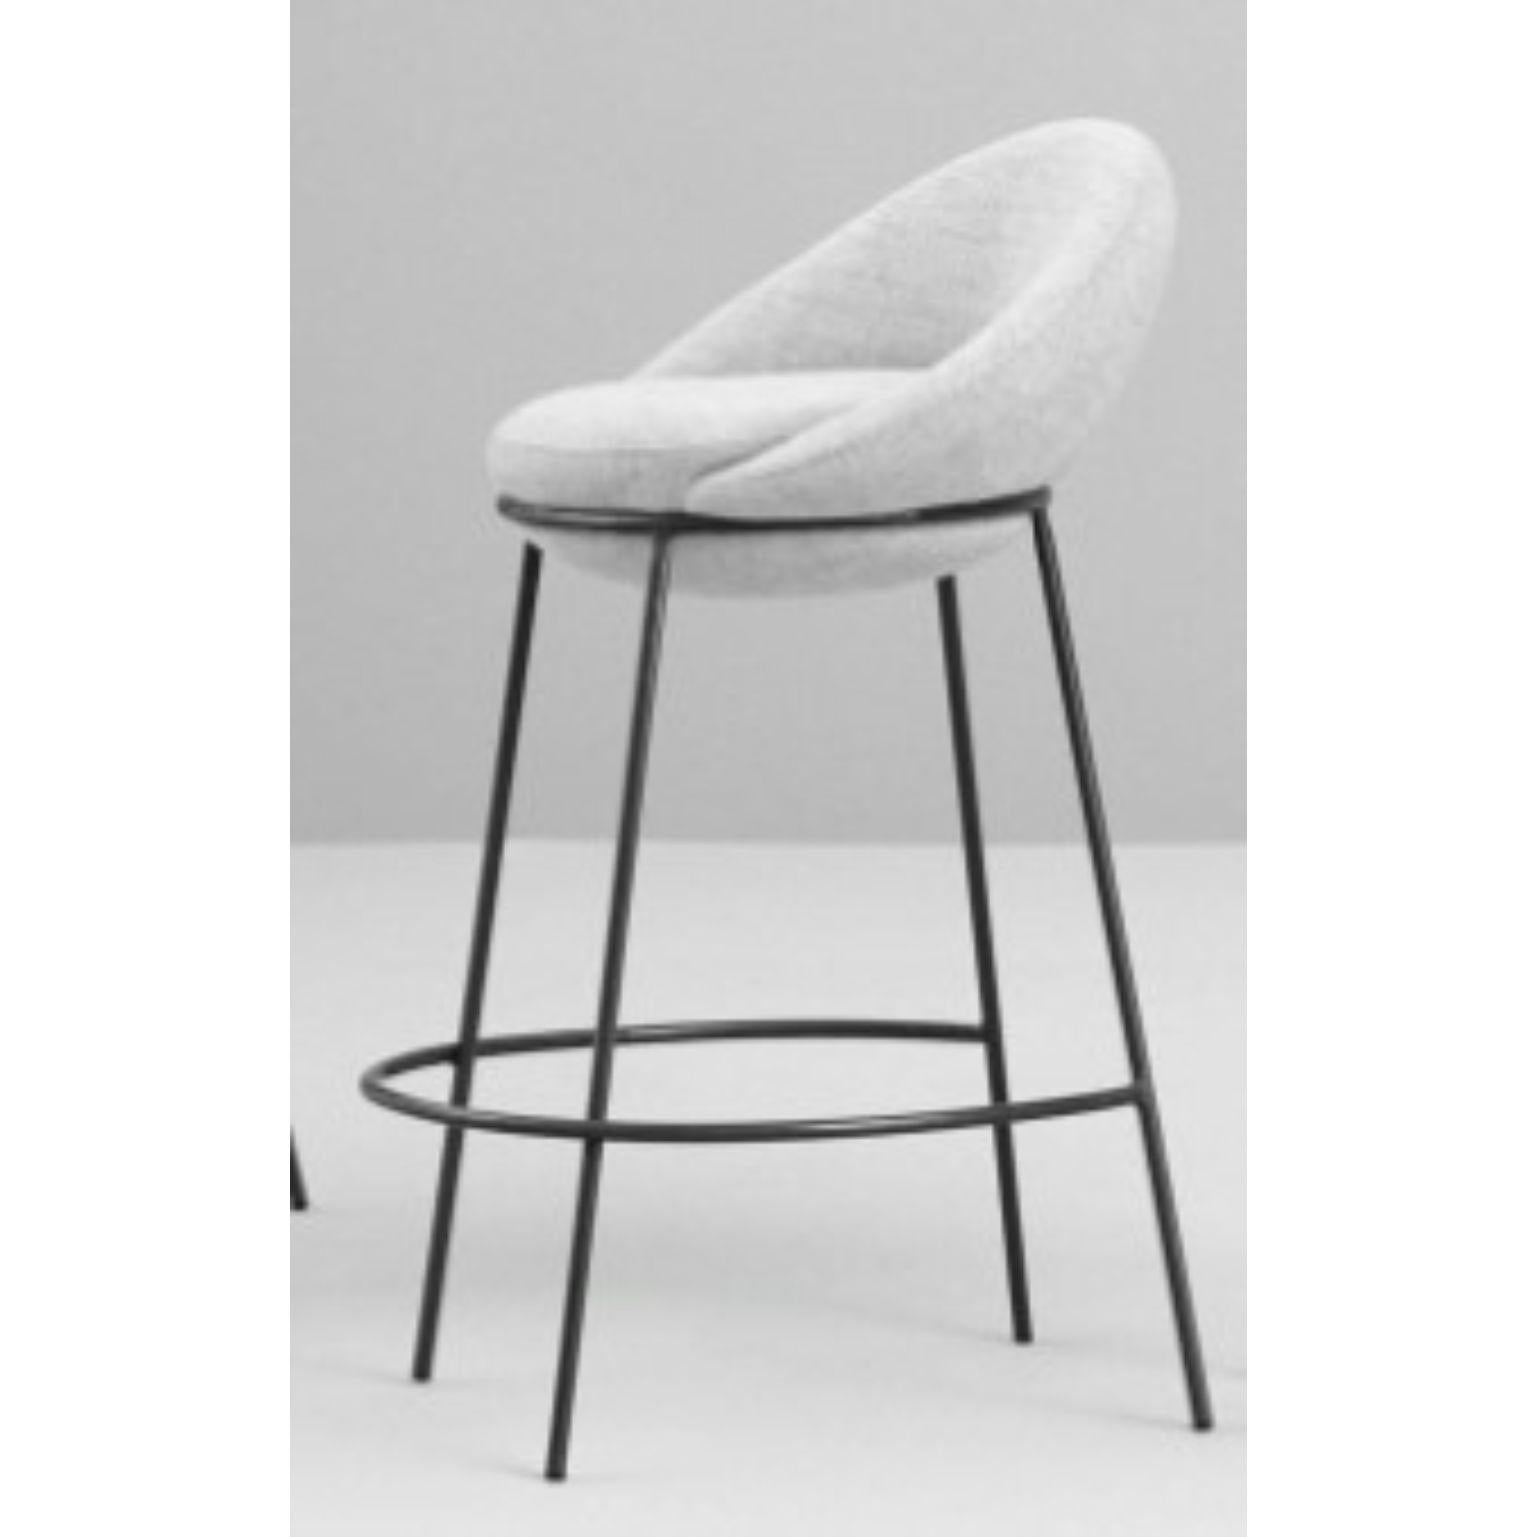 Nest stool with backrest by Pepe Albargues
Dimensions: W48, D57, H92, Seat74
Materials: Iron structure and MDF board
Foam CMHR (high resilience and flame retardant) for all our cushion filling systems
Painted or chromed legs

Also available: